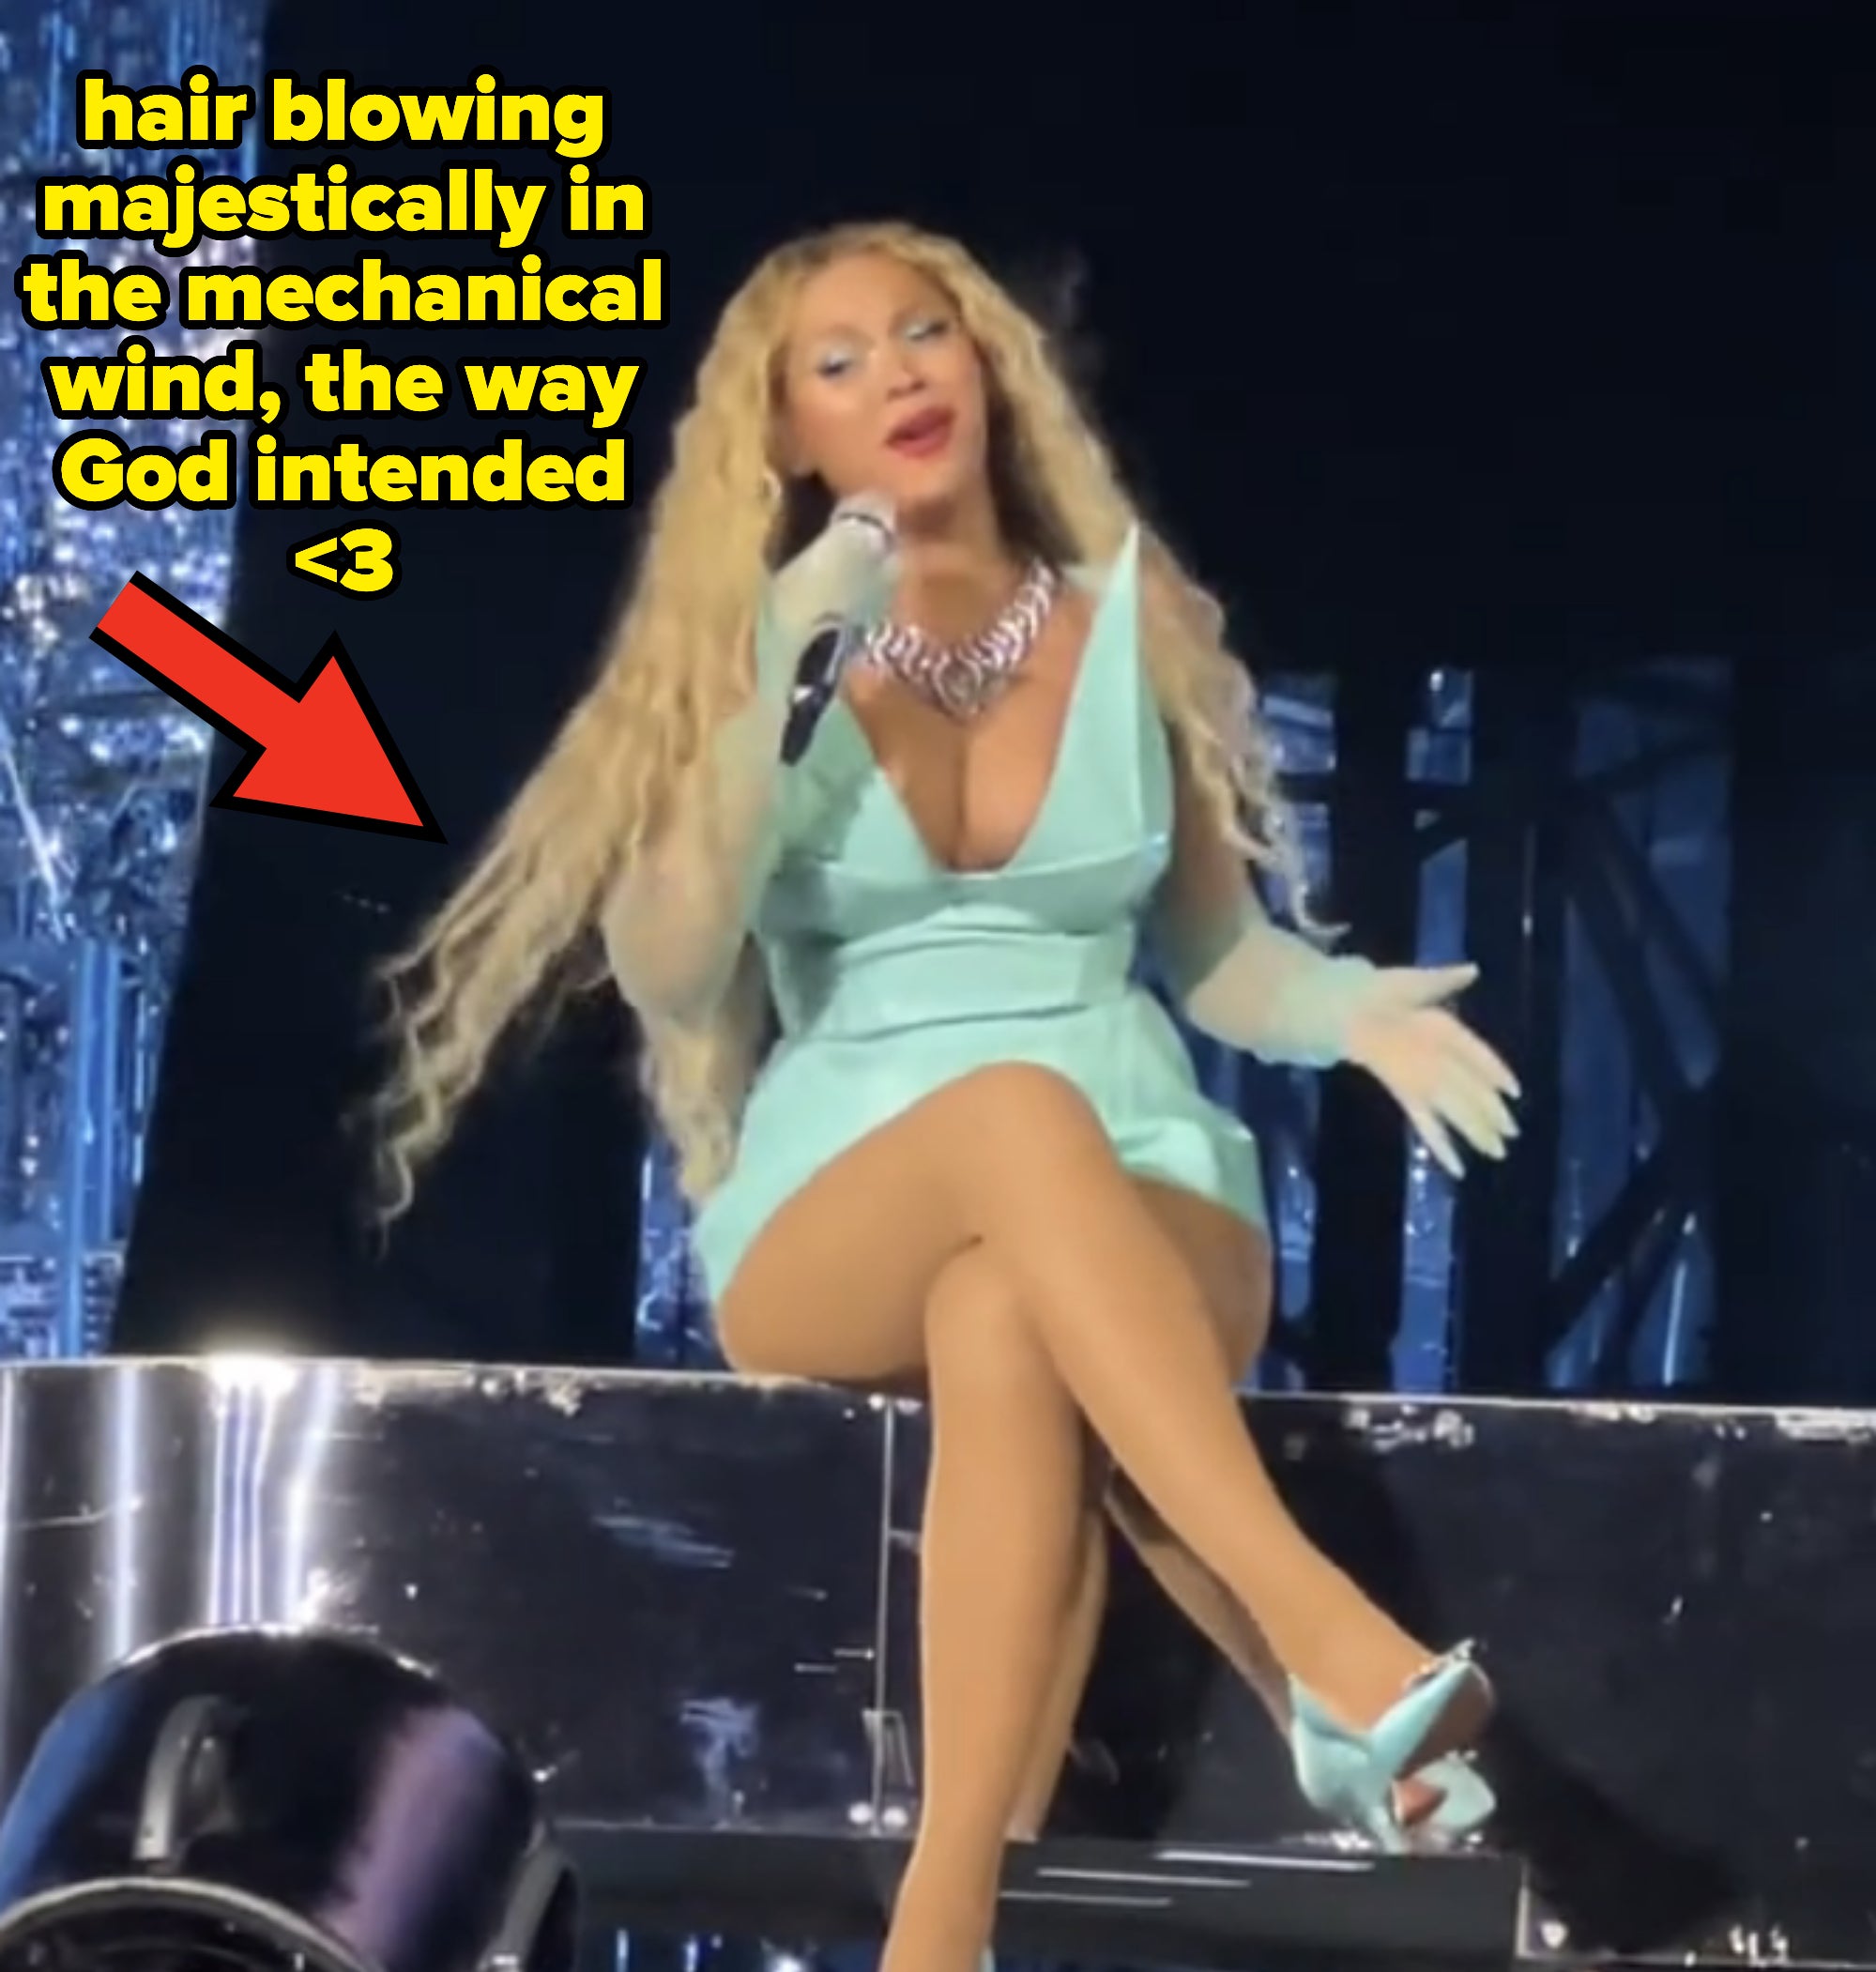 Beyoncé performing on stage with caption &quot;hair blowing majestically in the mechanical wind, the way God intended&quot;